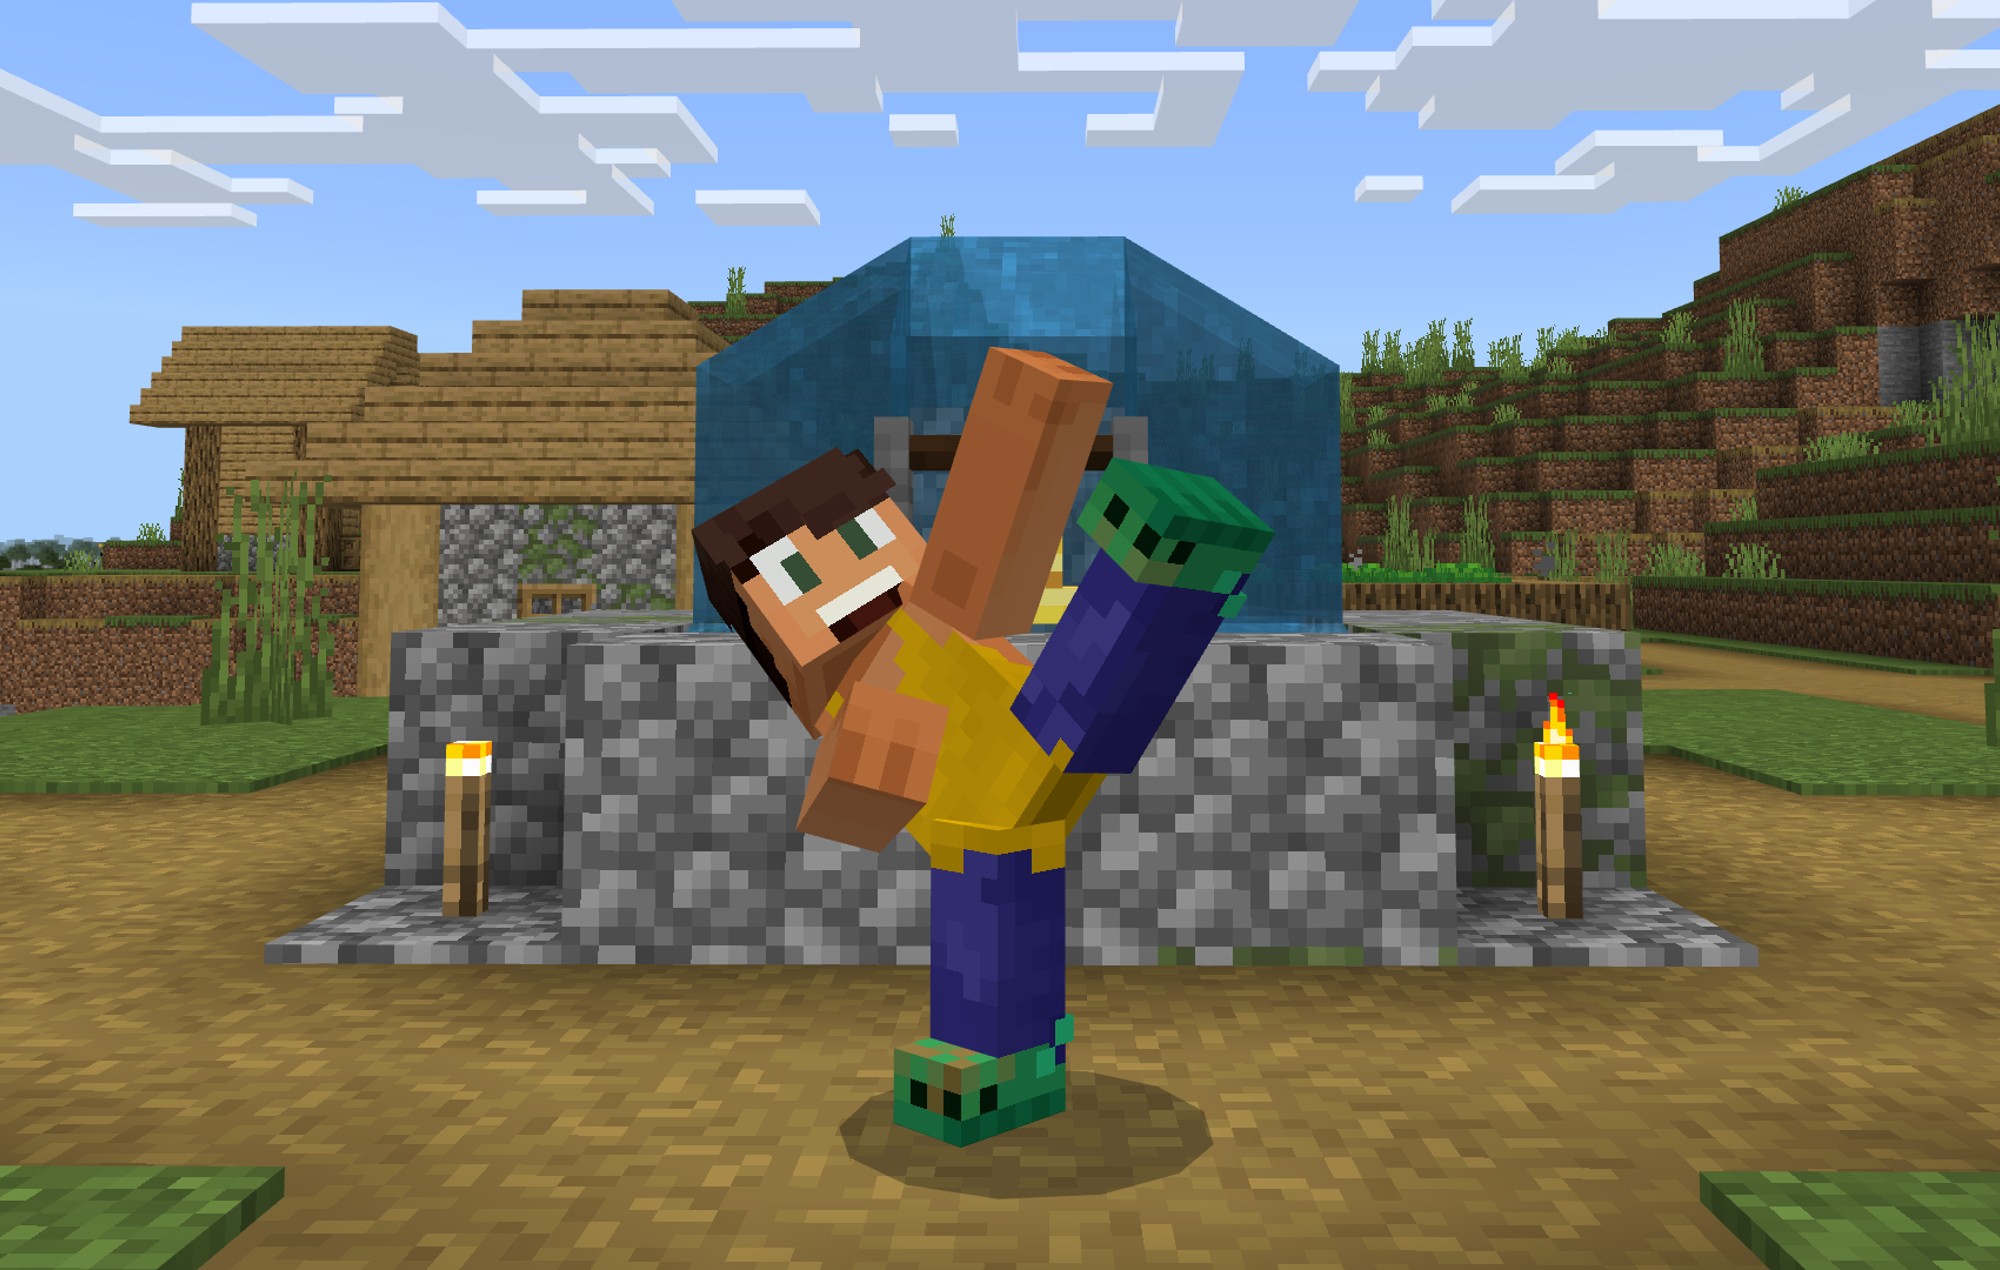 Minecraft’ announces real-world and in-game collaboration with Crocs